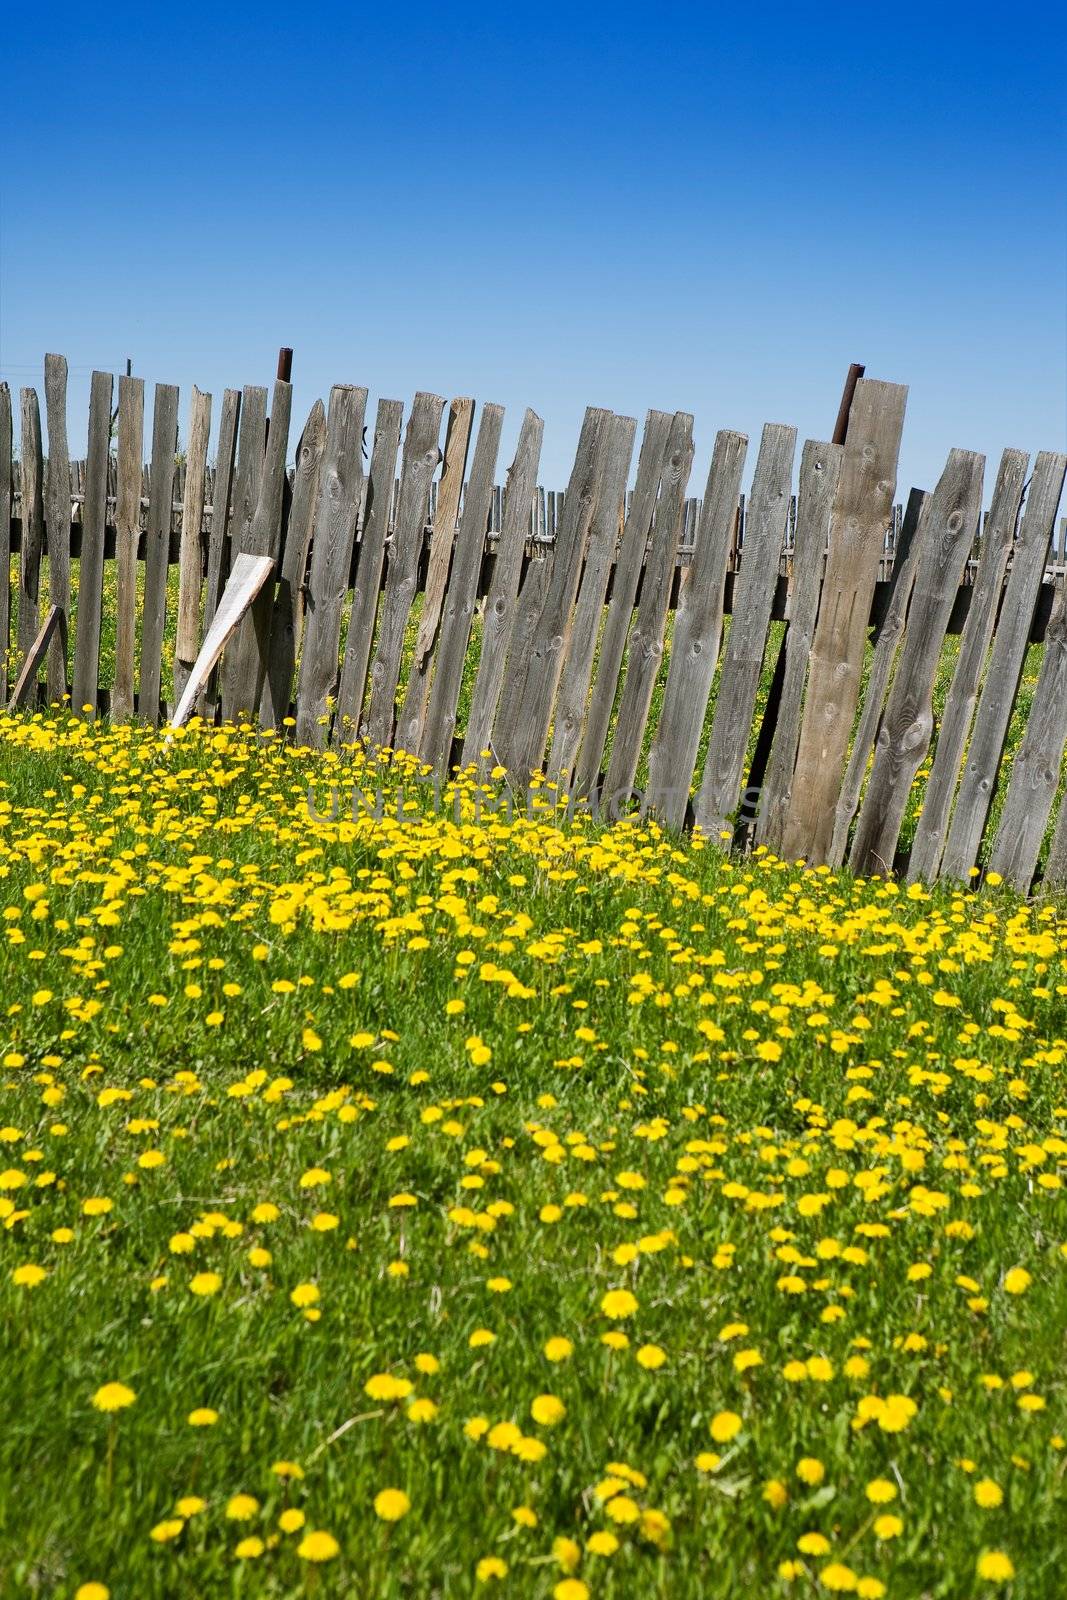 Wooden fence and yellow dandelions by Gravicapa